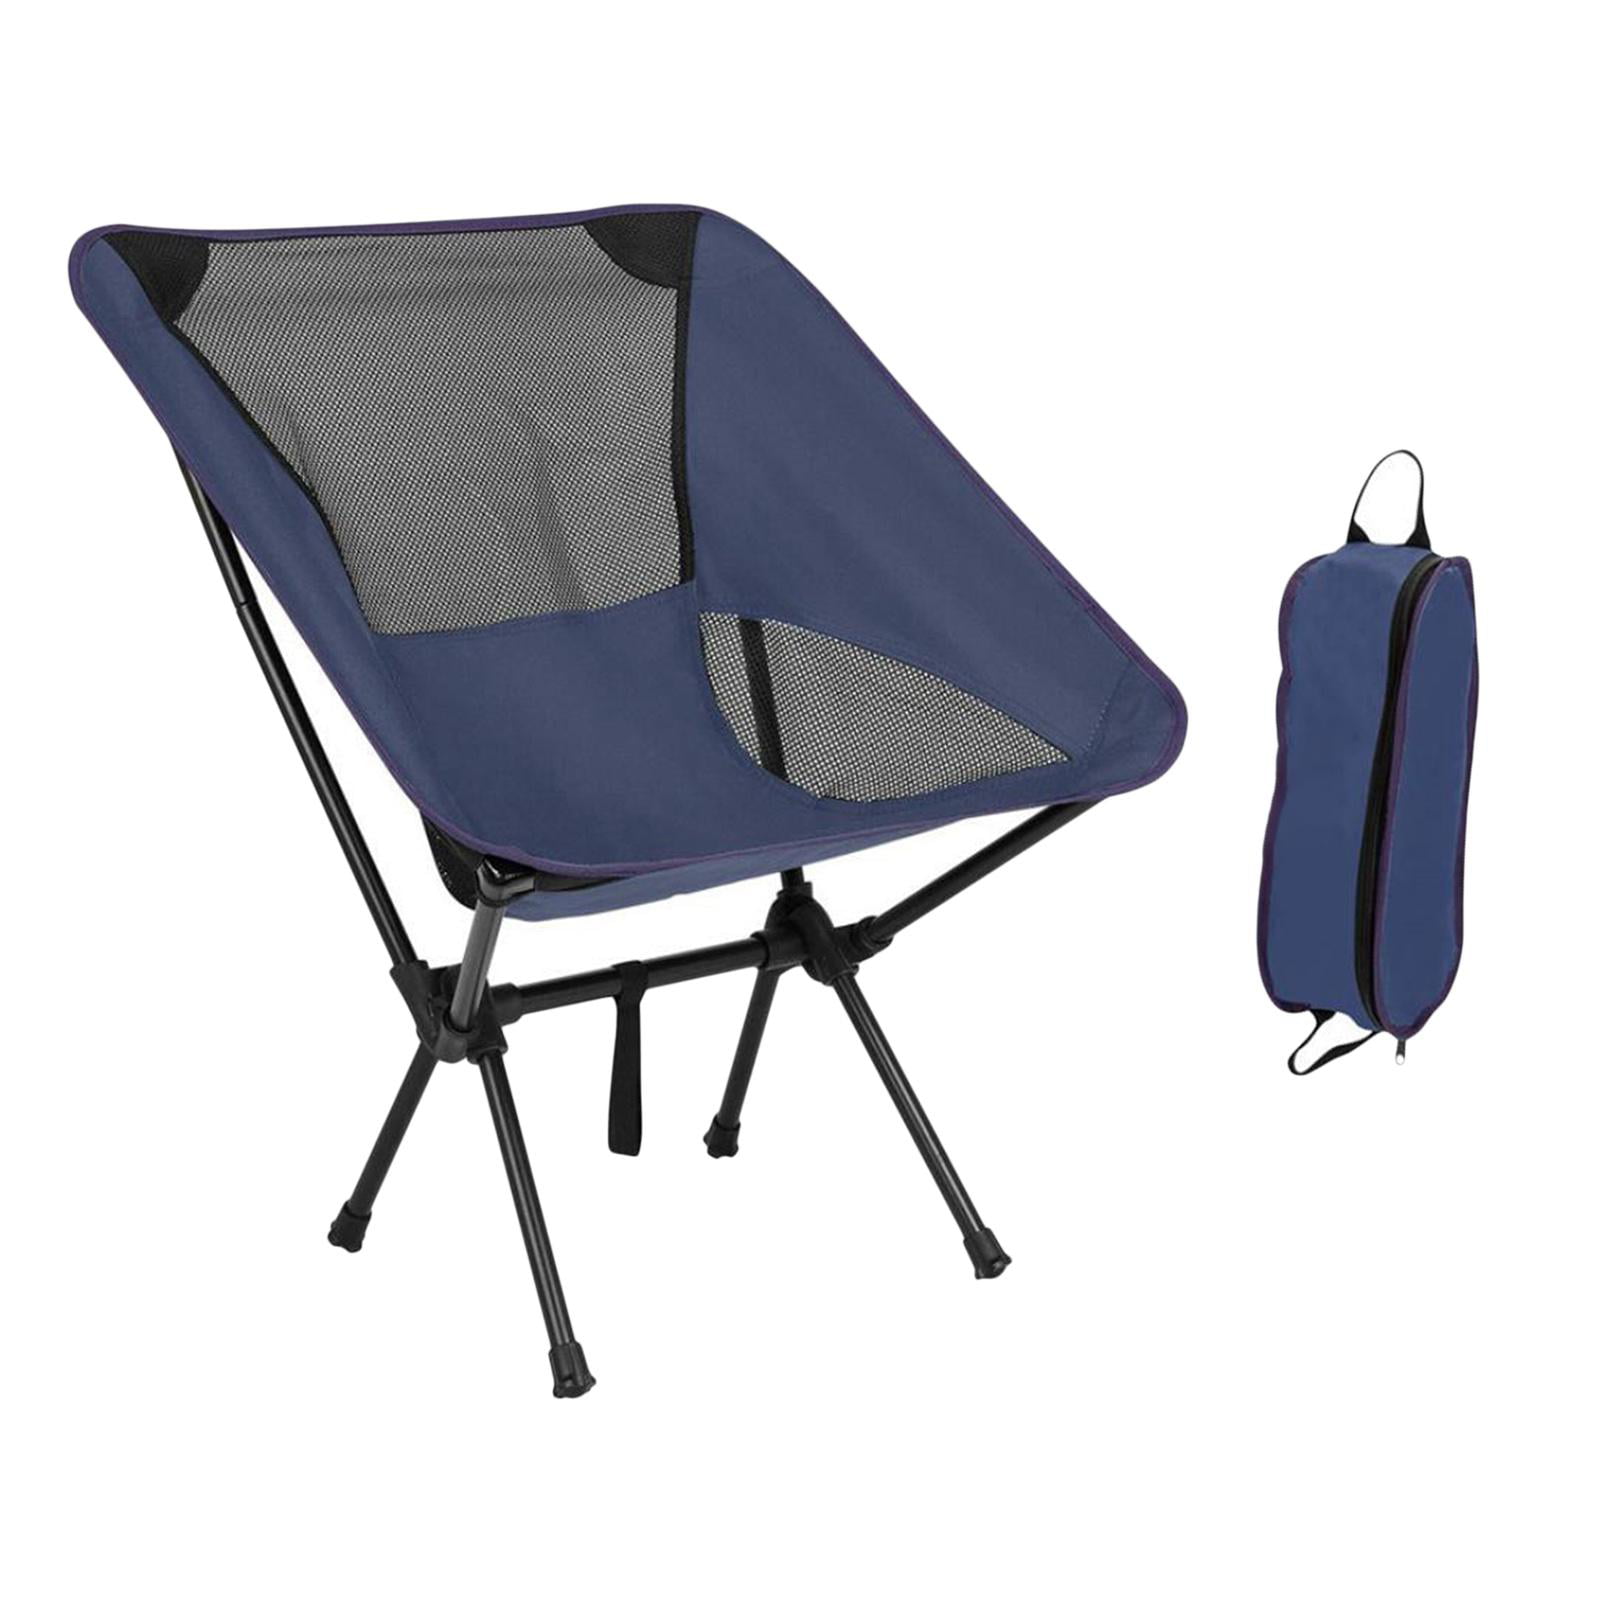 Folding Camping Chairs Garden Foldable Fold Up Seat Outdoor Fishing Chair 1/2PCS 